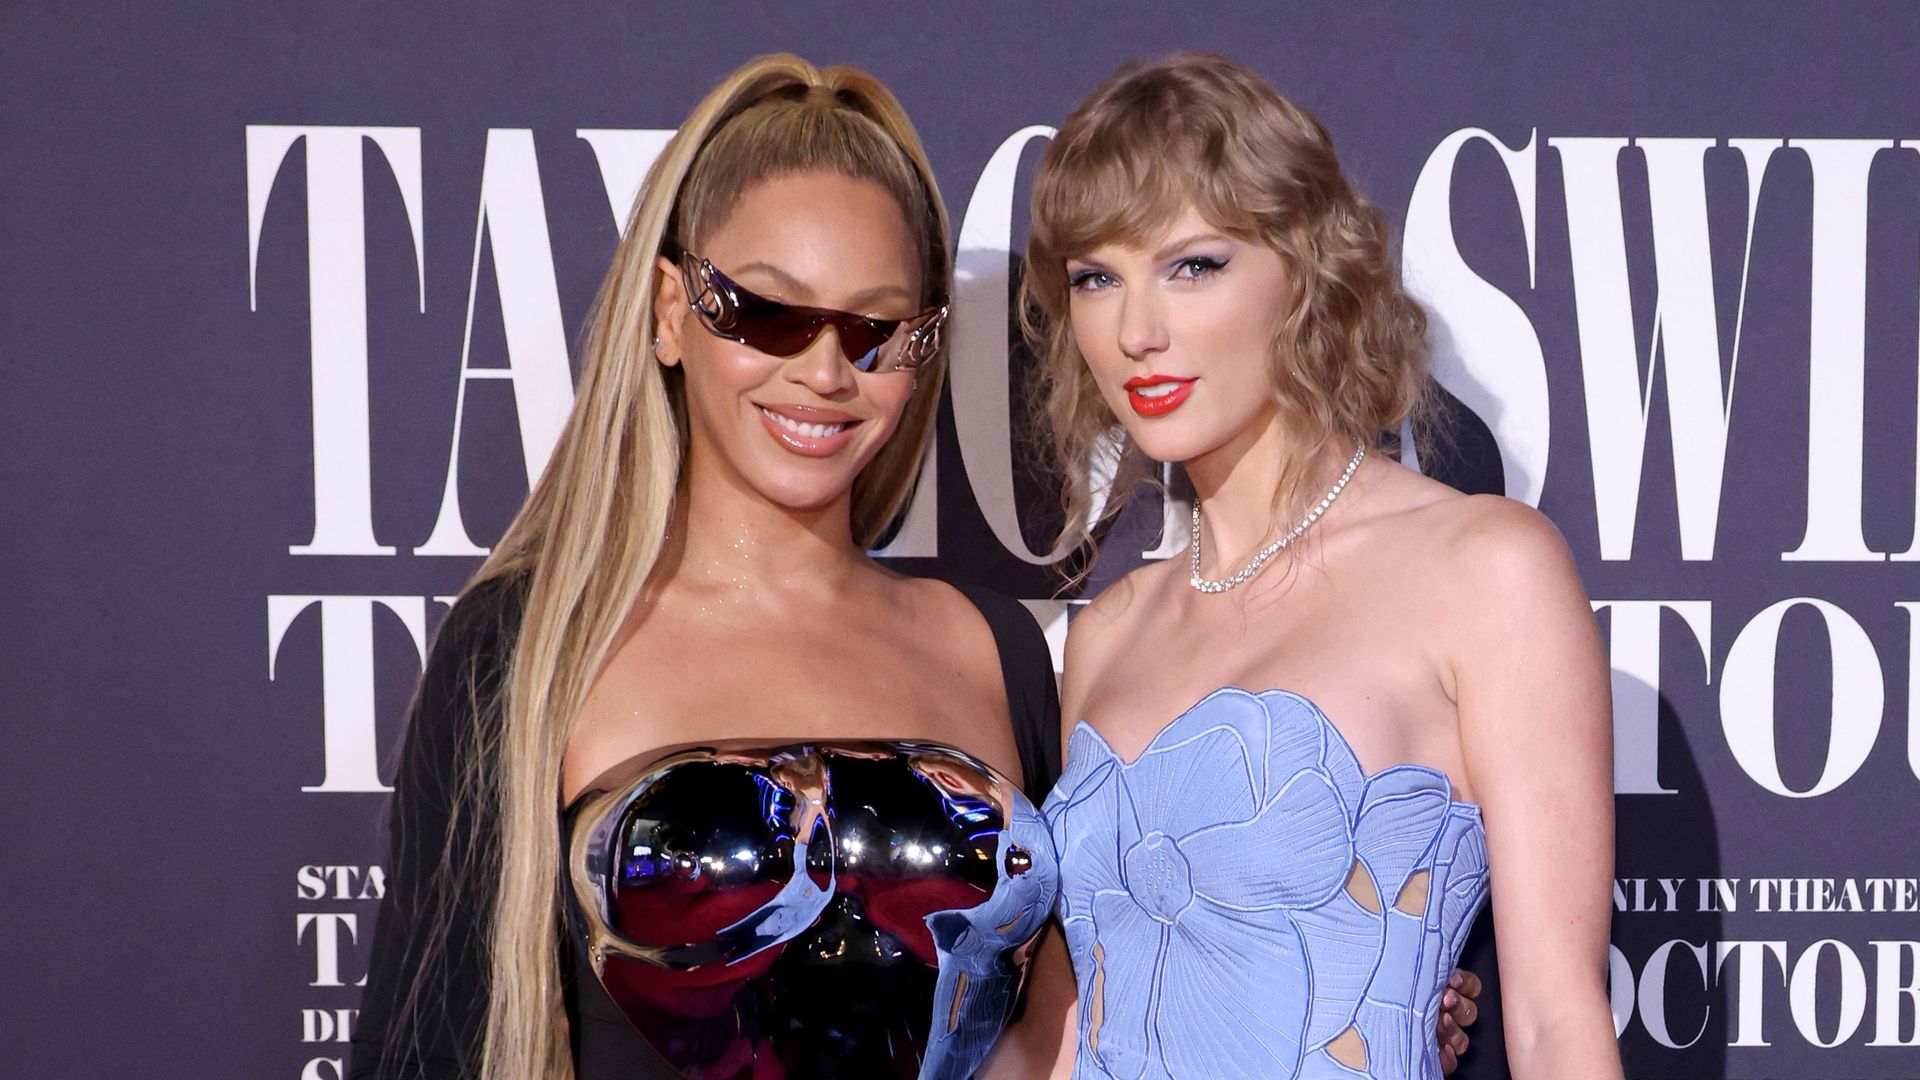 LOS ANGELES, CALIFORNIA - OCTOBER 11: (L-R) BeyoncÃ© Knowles-Carter and Taylor Swift attend the "Taylor Swift: The Eras Tour" Concert Movie World Premiere at AMC The Grove 14 on October 11, 2023 in Los Angeles, California. (Photo by John Shearer/Getty Images for TAS)